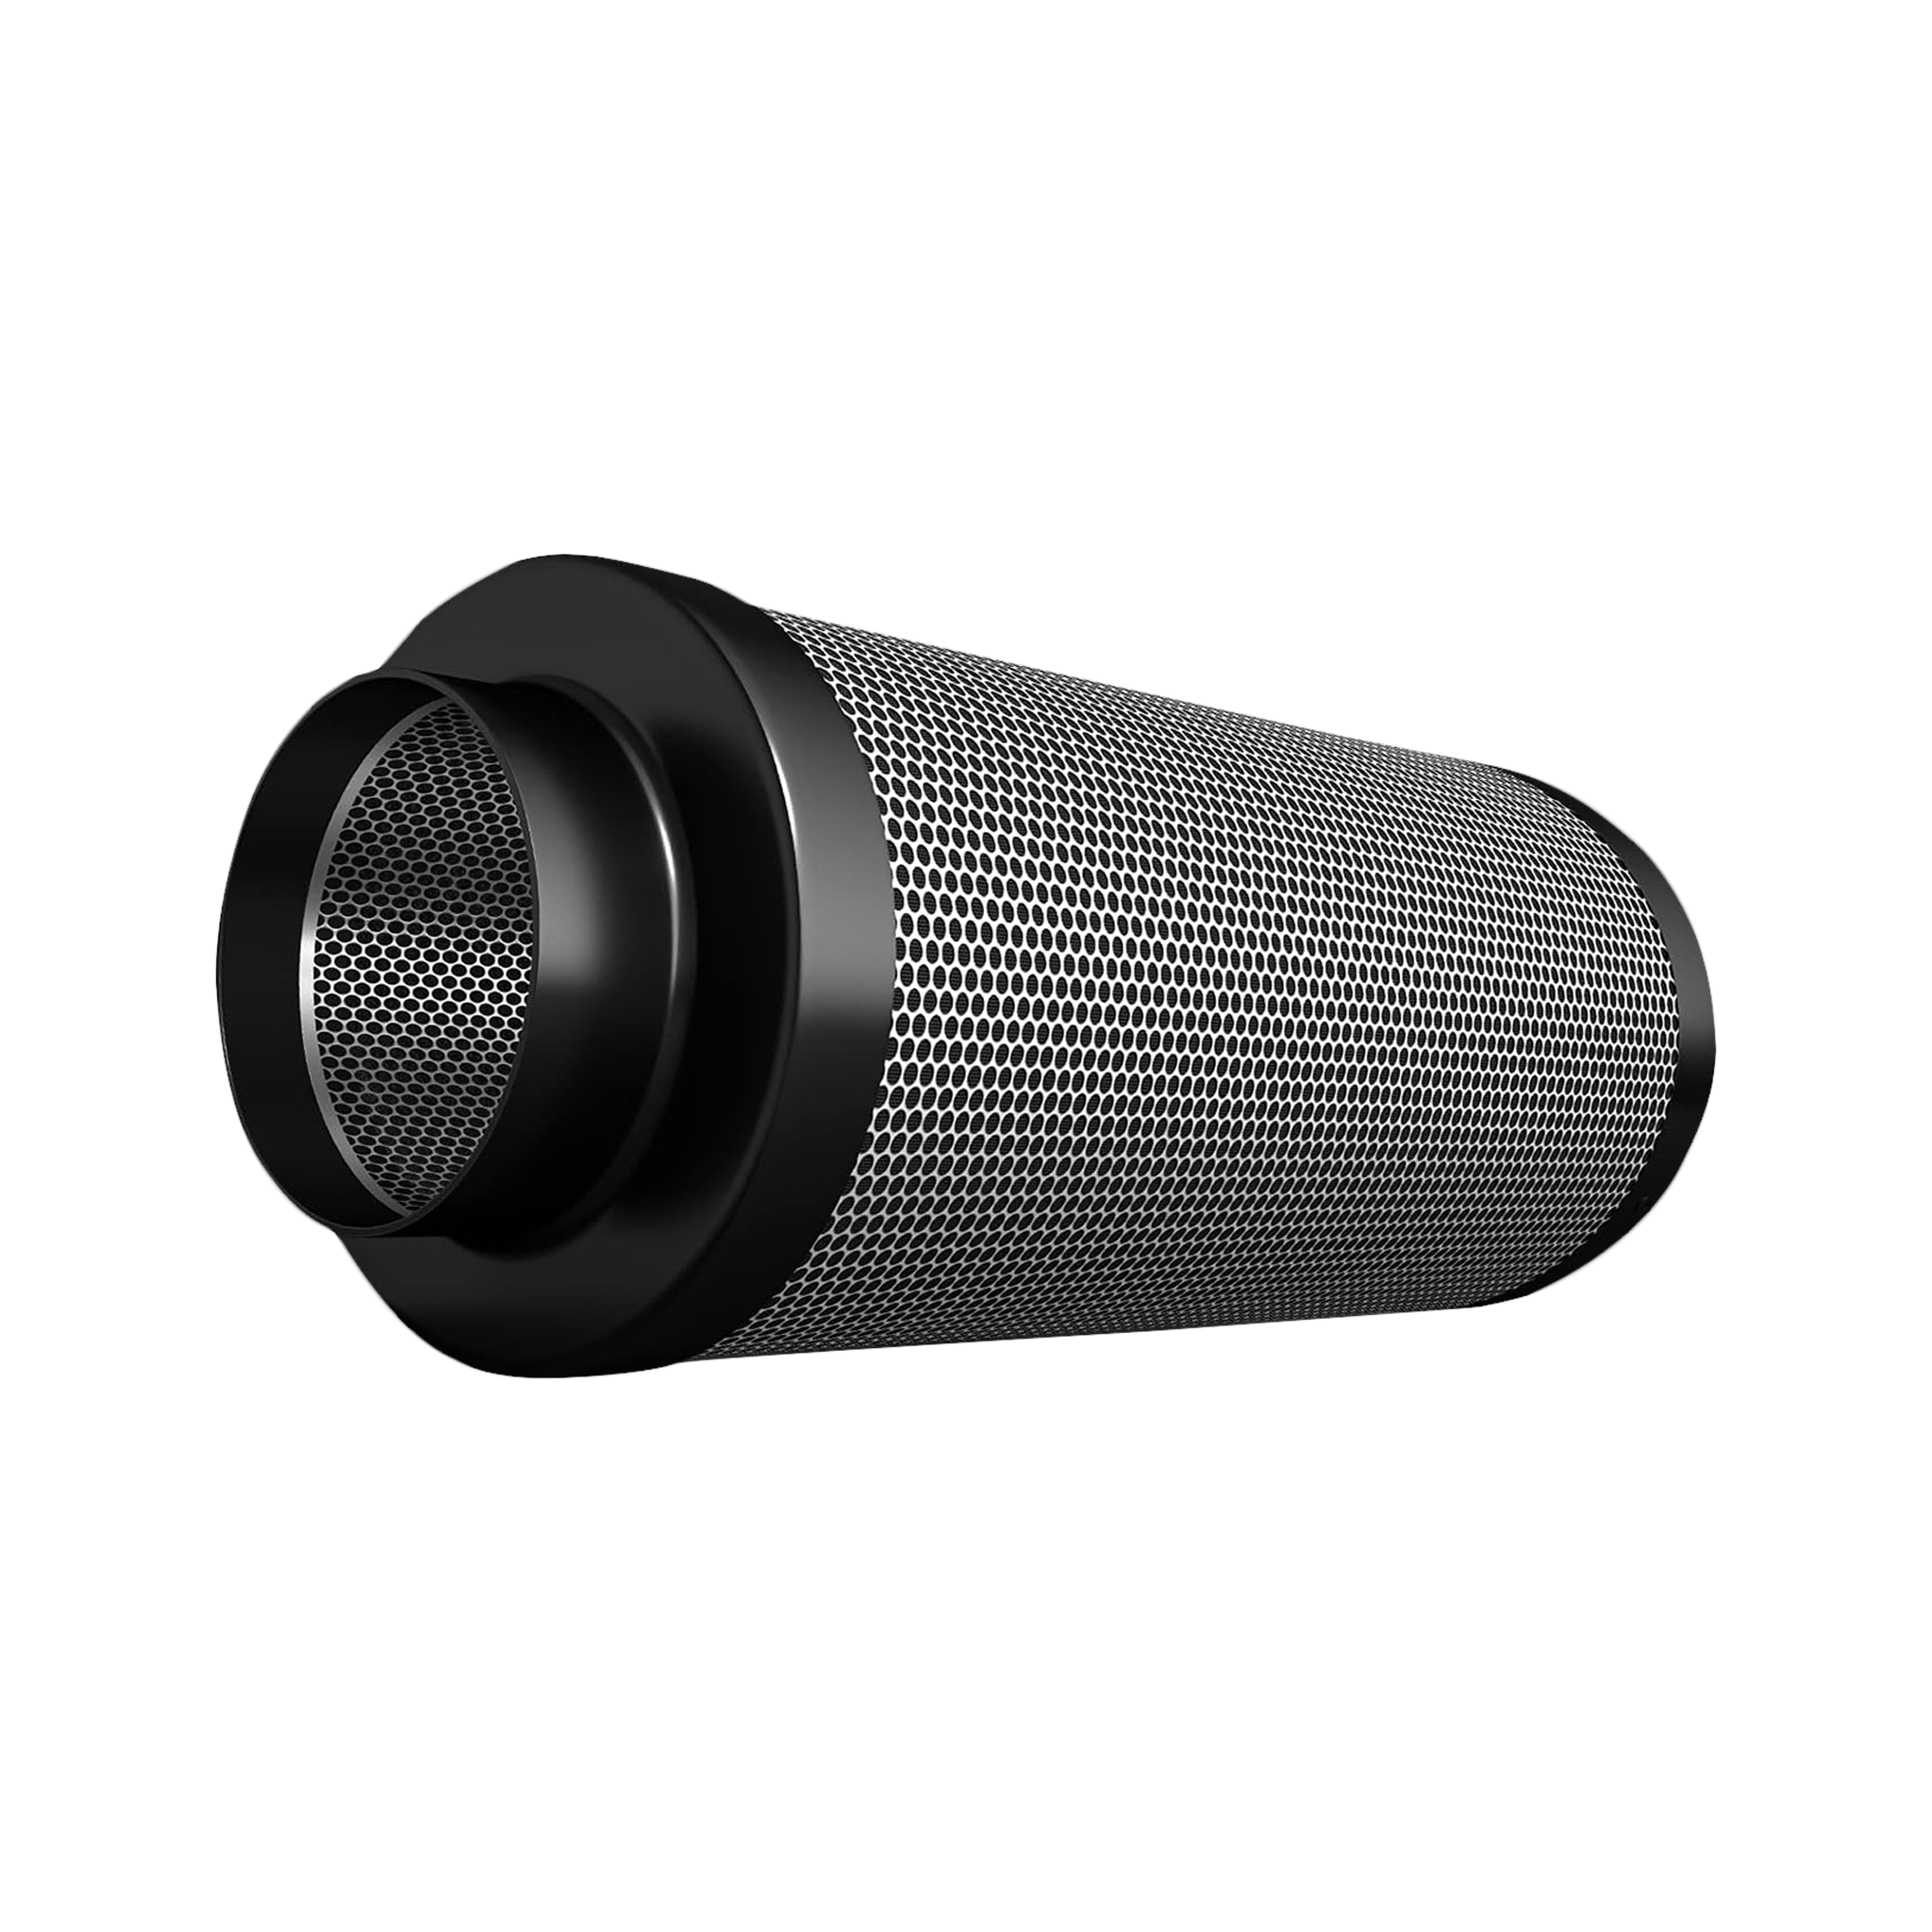 Snake Ray® 150mm / Air Carbon Filter